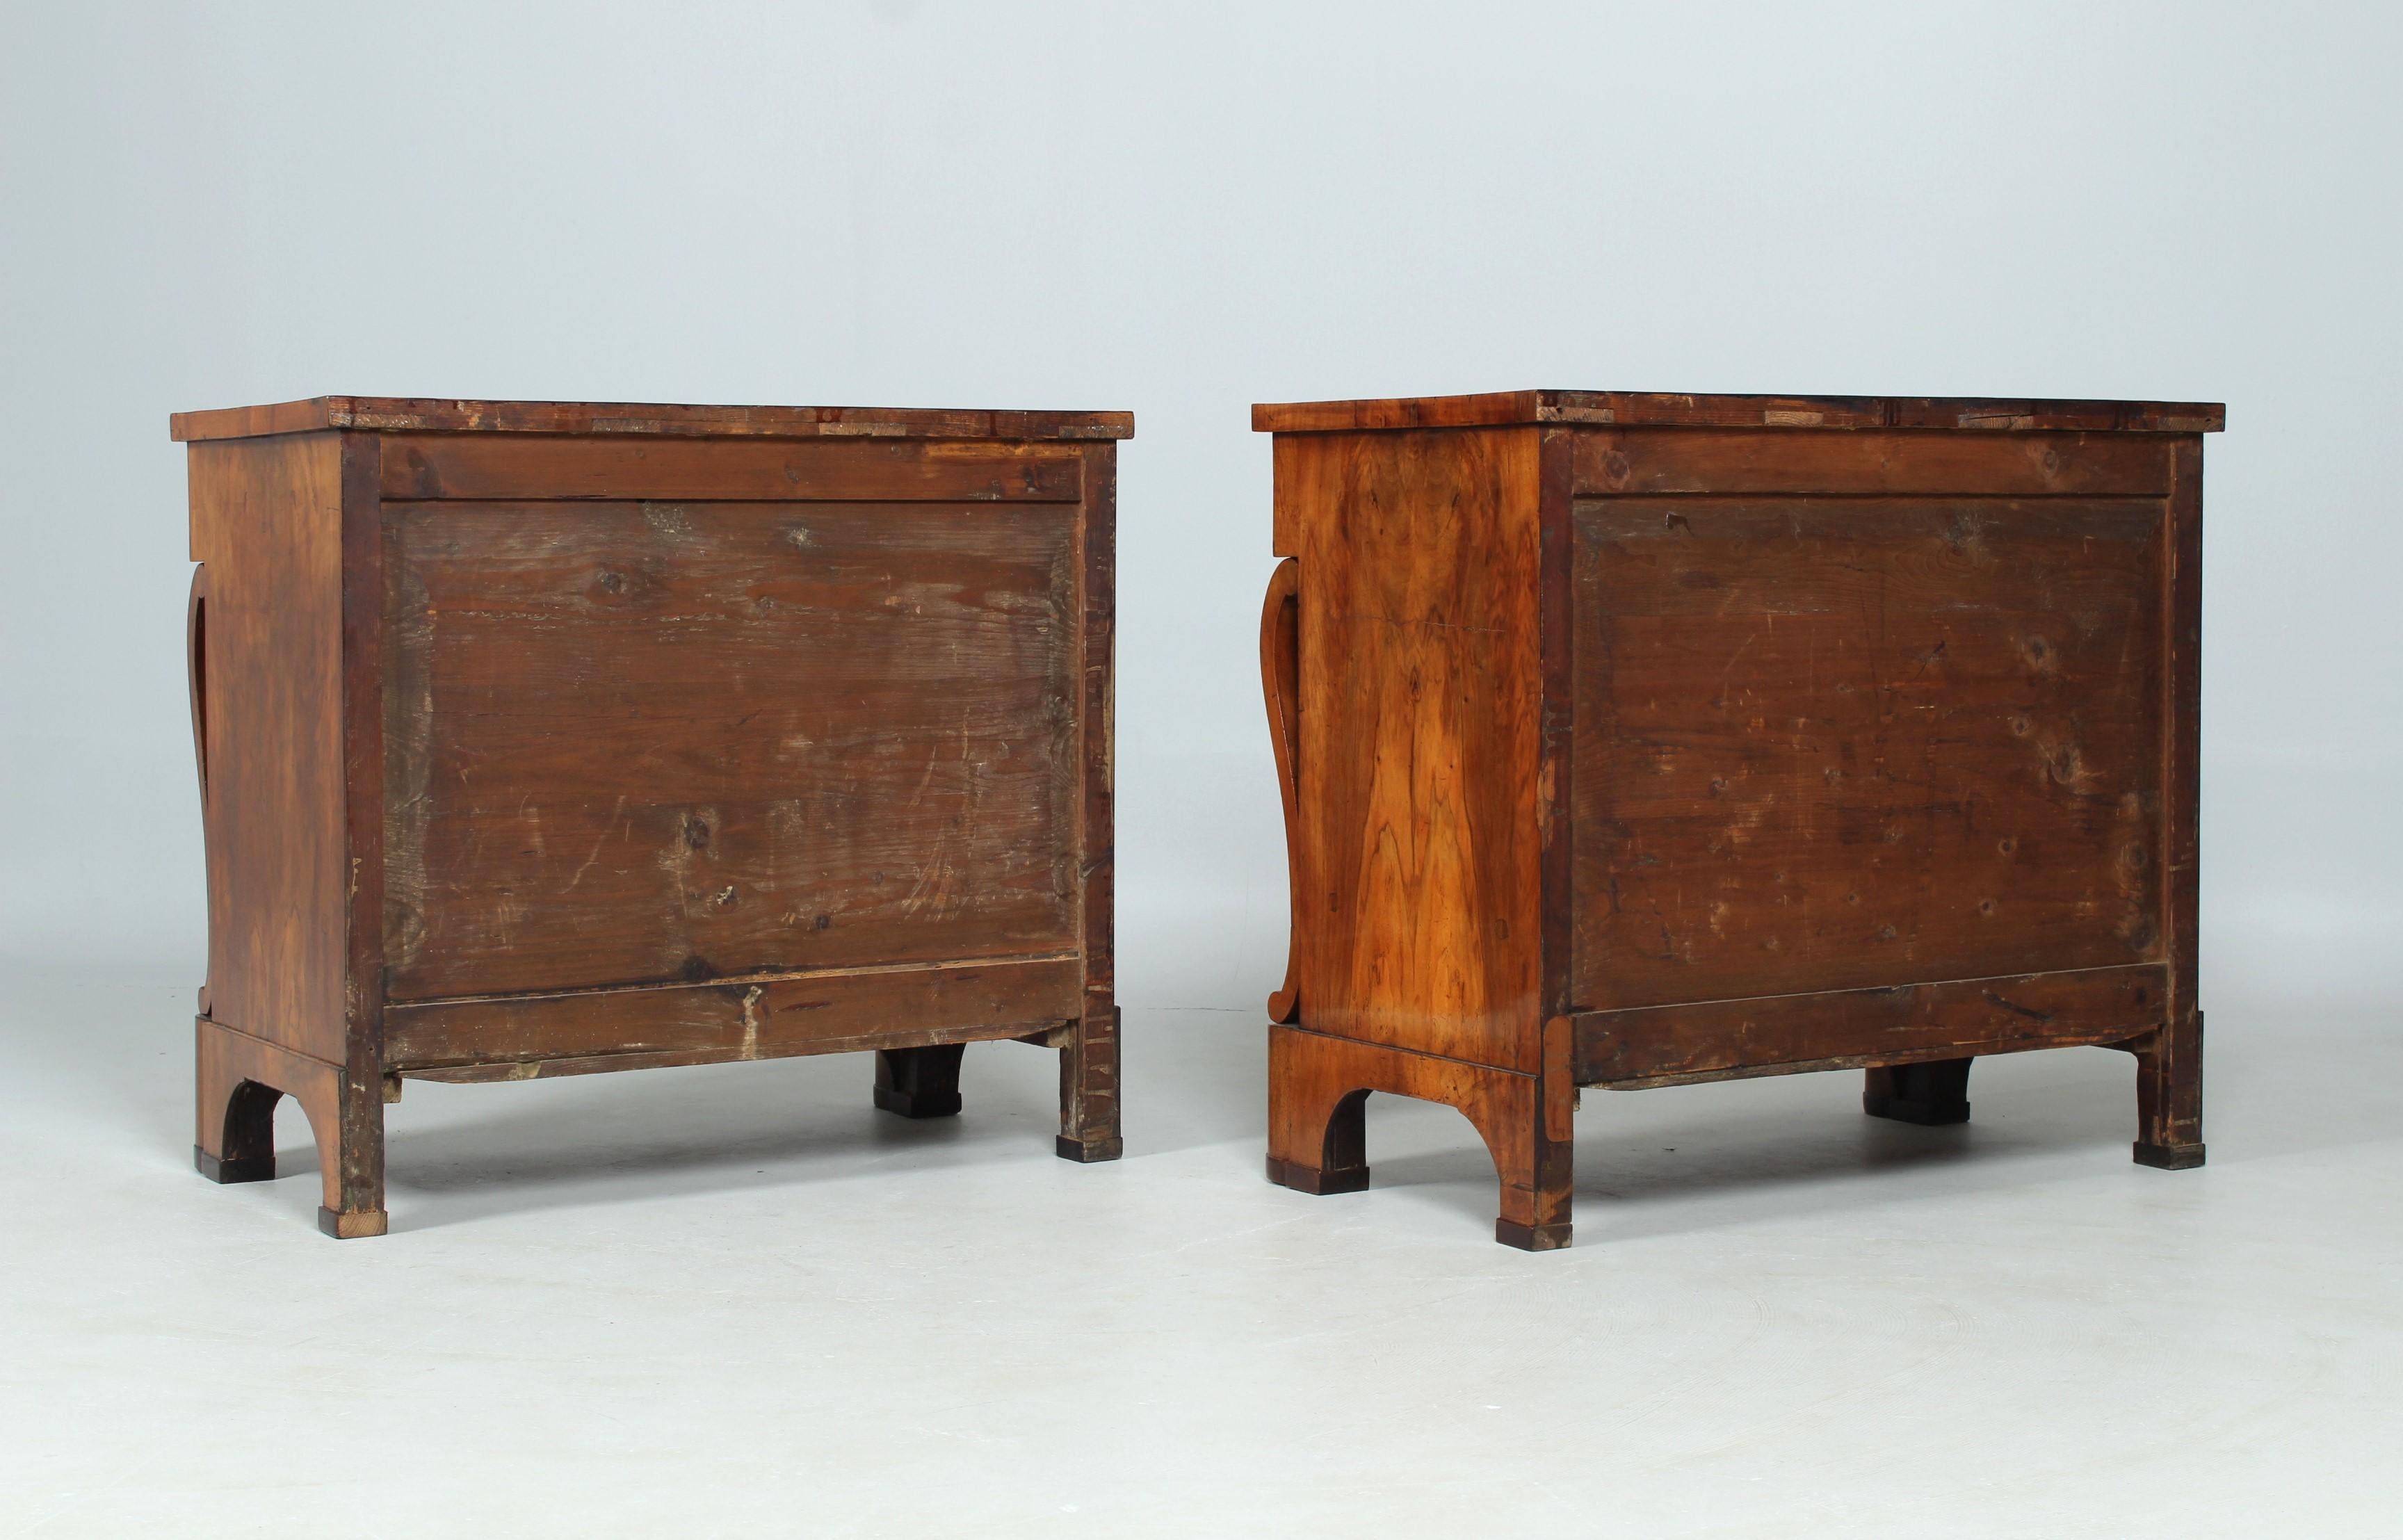 Pair of Early 19th Century Biedermeier Chests or Sideboards, Walnut, c. 1825 13